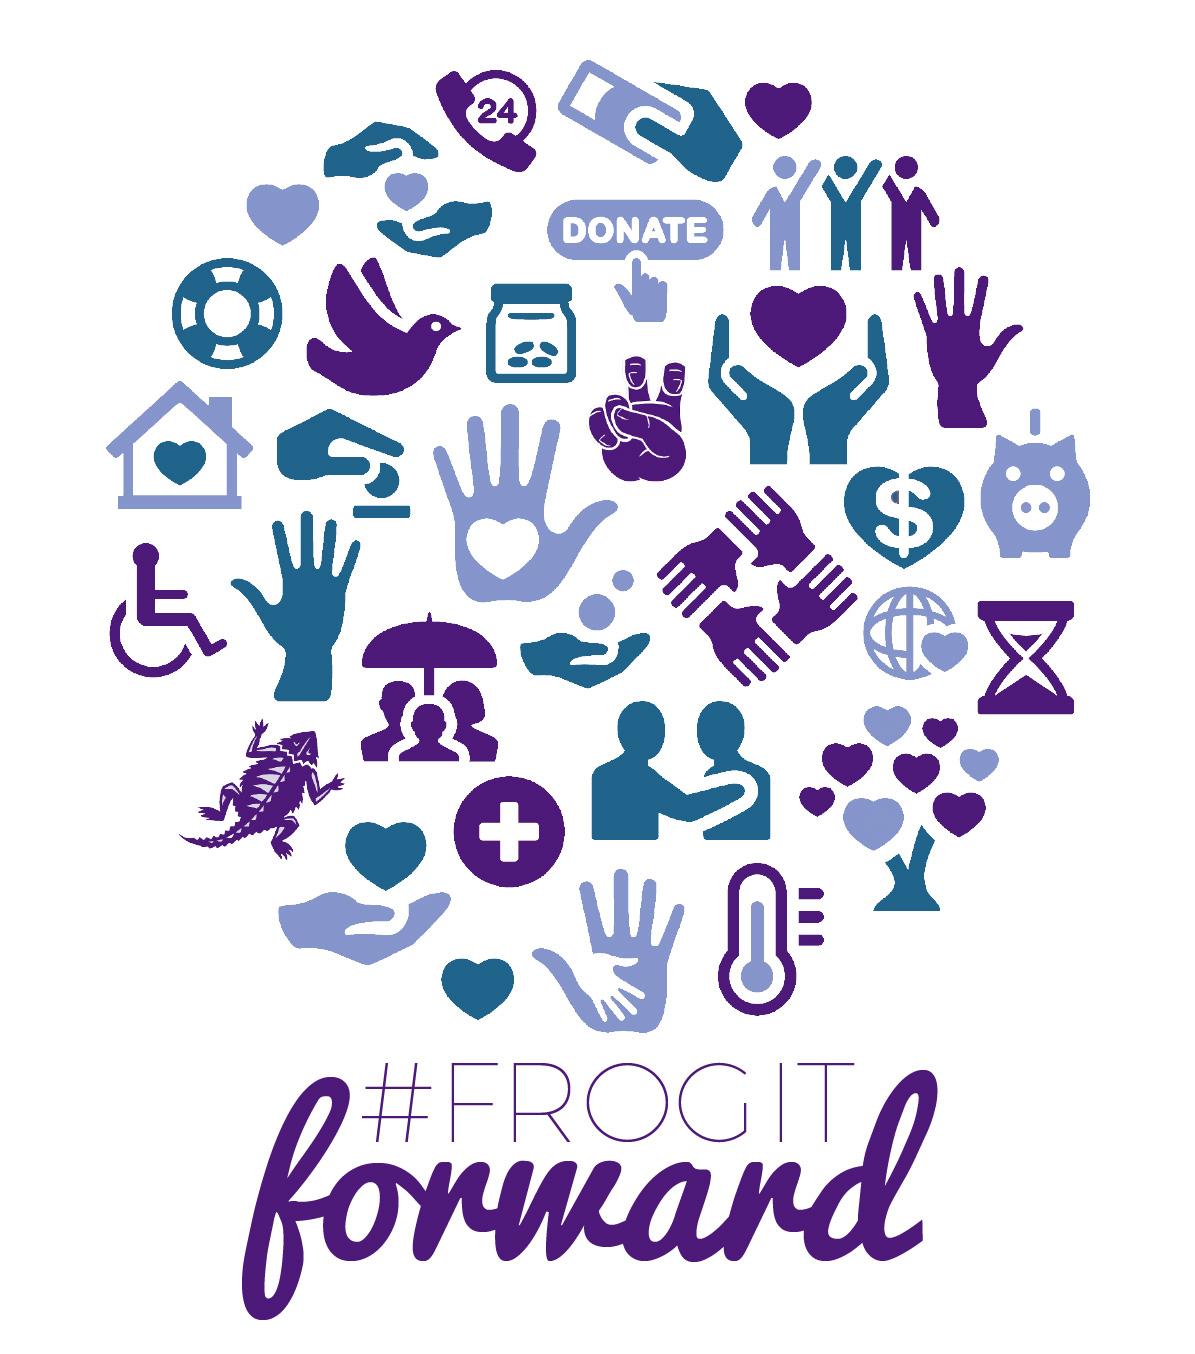 The Frog It Forward collage shows different ways students can frog it forward. (Courtesy of Rachael Capua) 